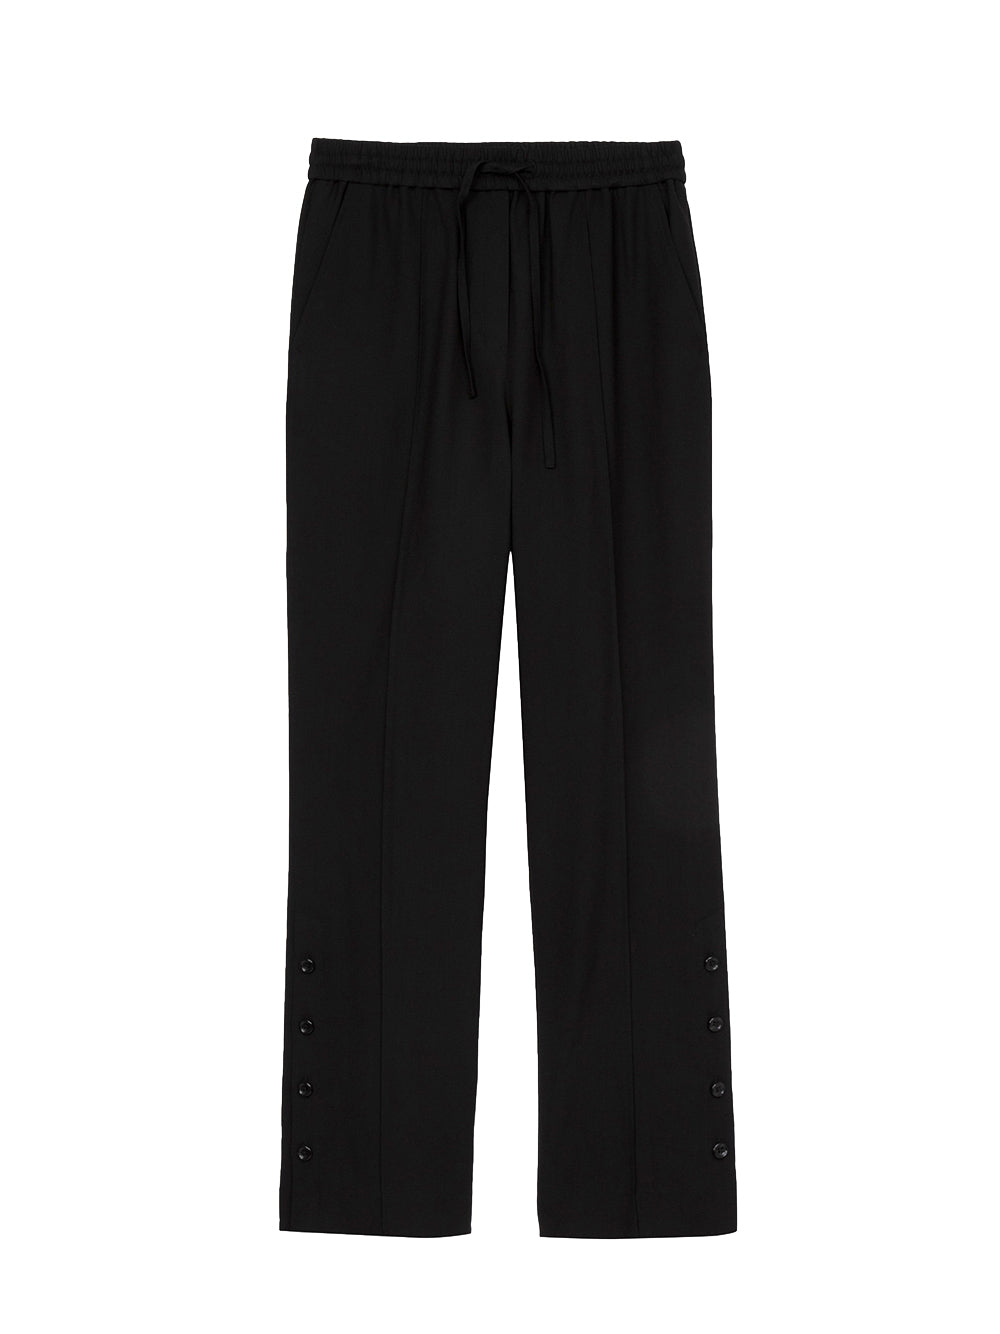 Cropped Elasticated Pants With Side Vent (Black)